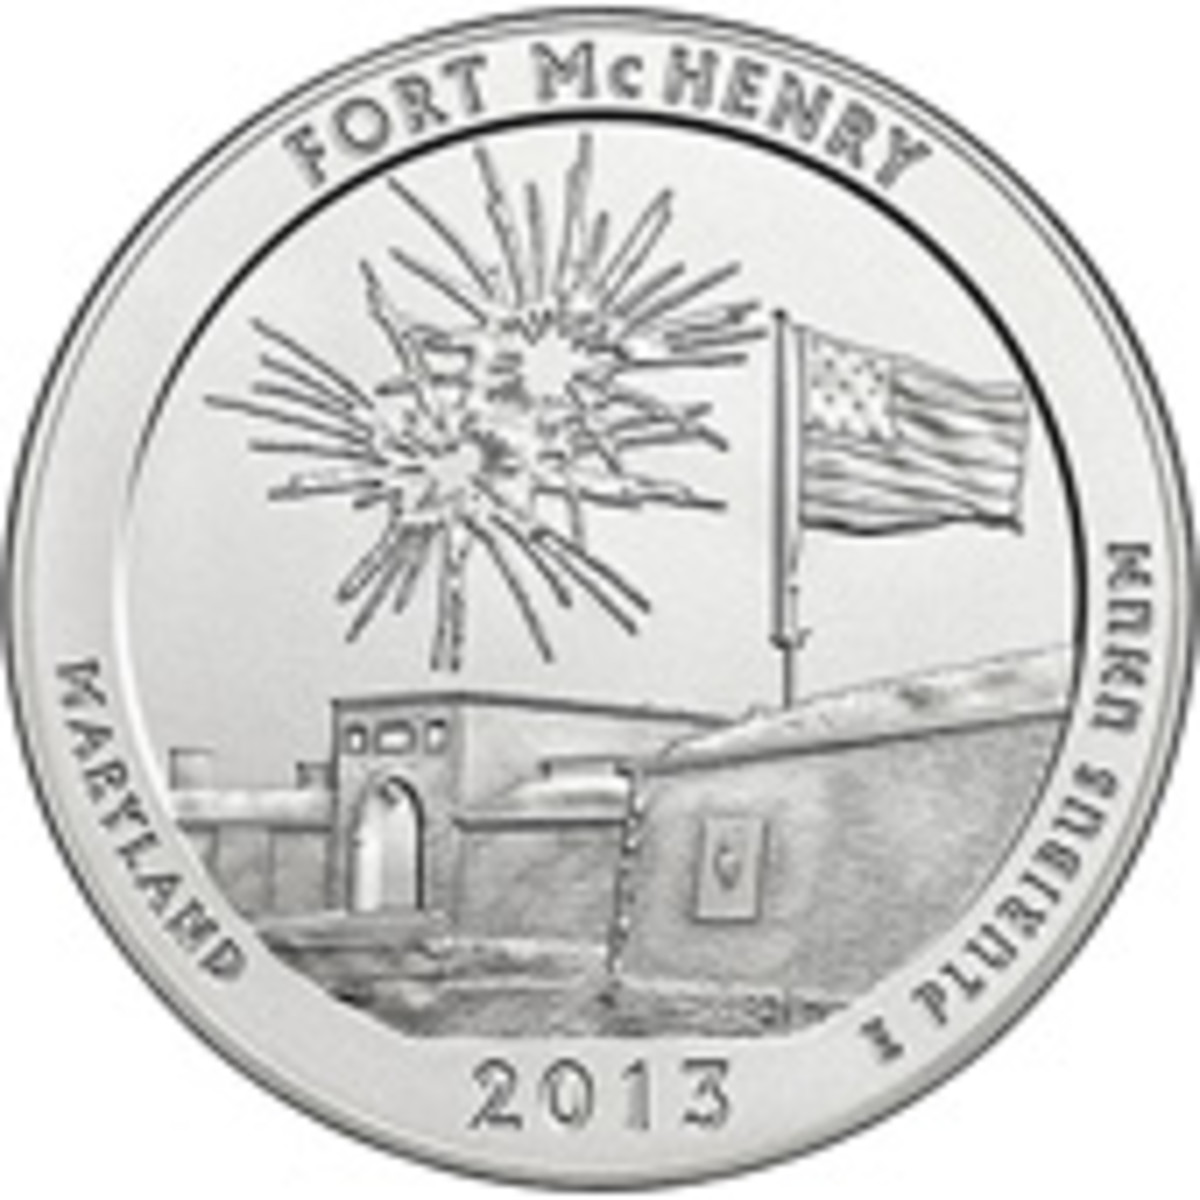 Fort McHenry silver coin